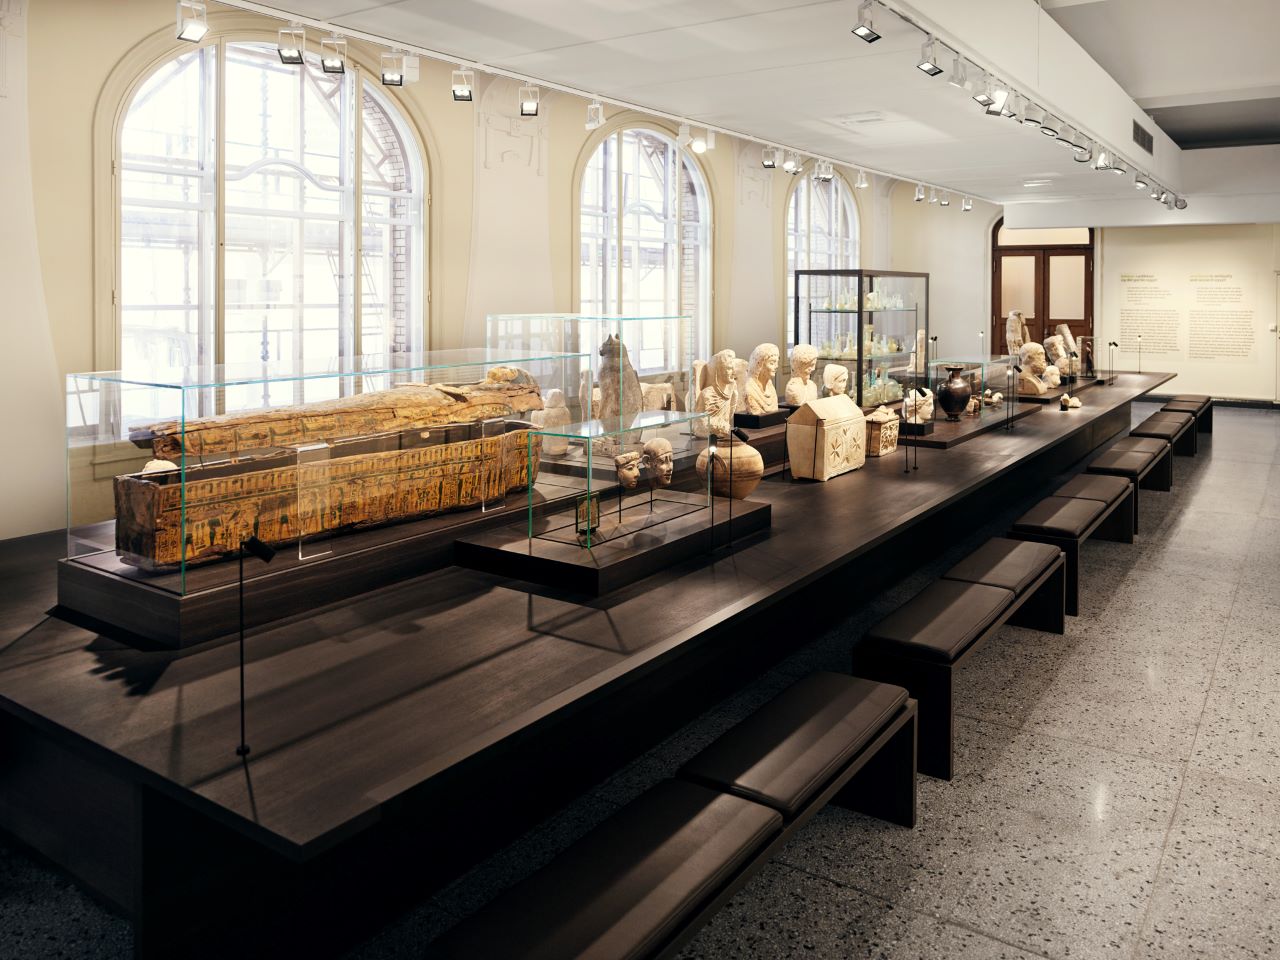 Featured image for “The Historical Museum”